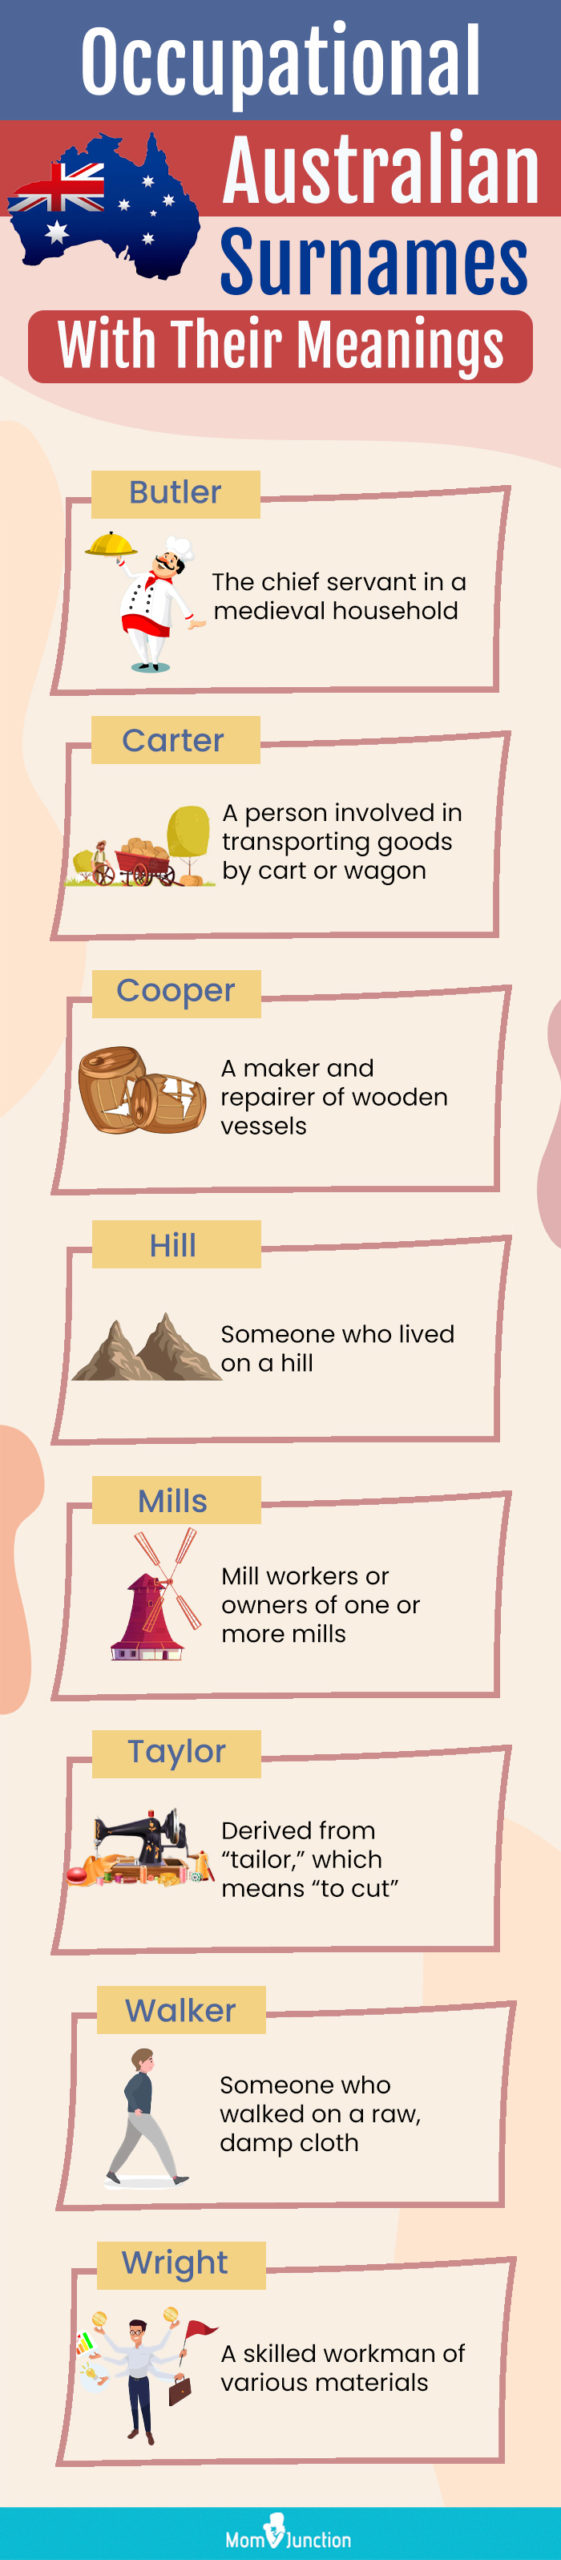 occupational australian surnames with their meanings (infographic)